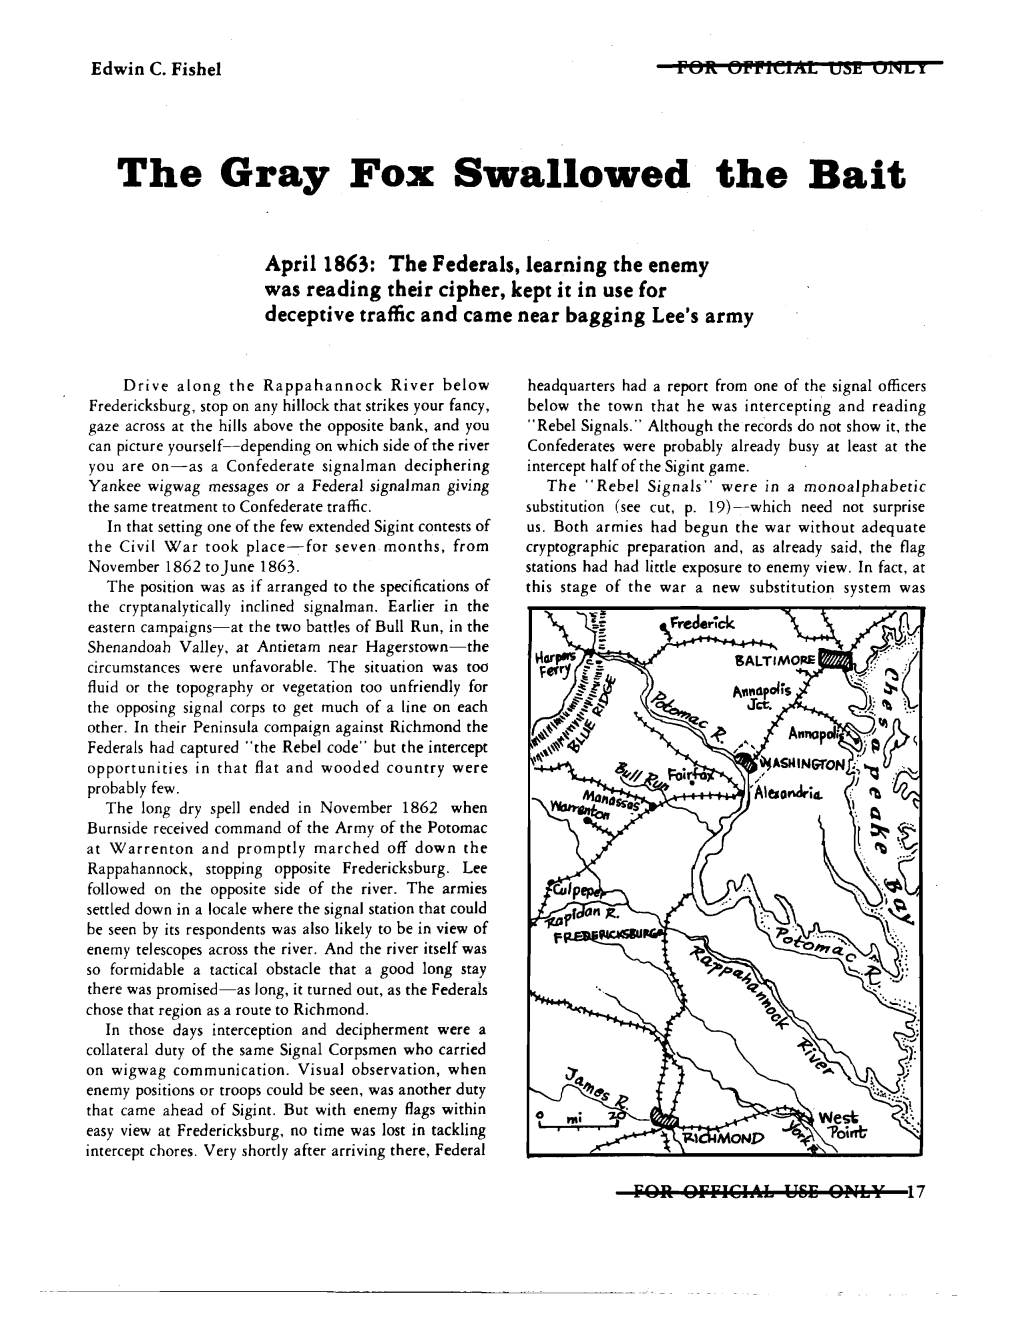 The Gray Fox Swallowed the Bait